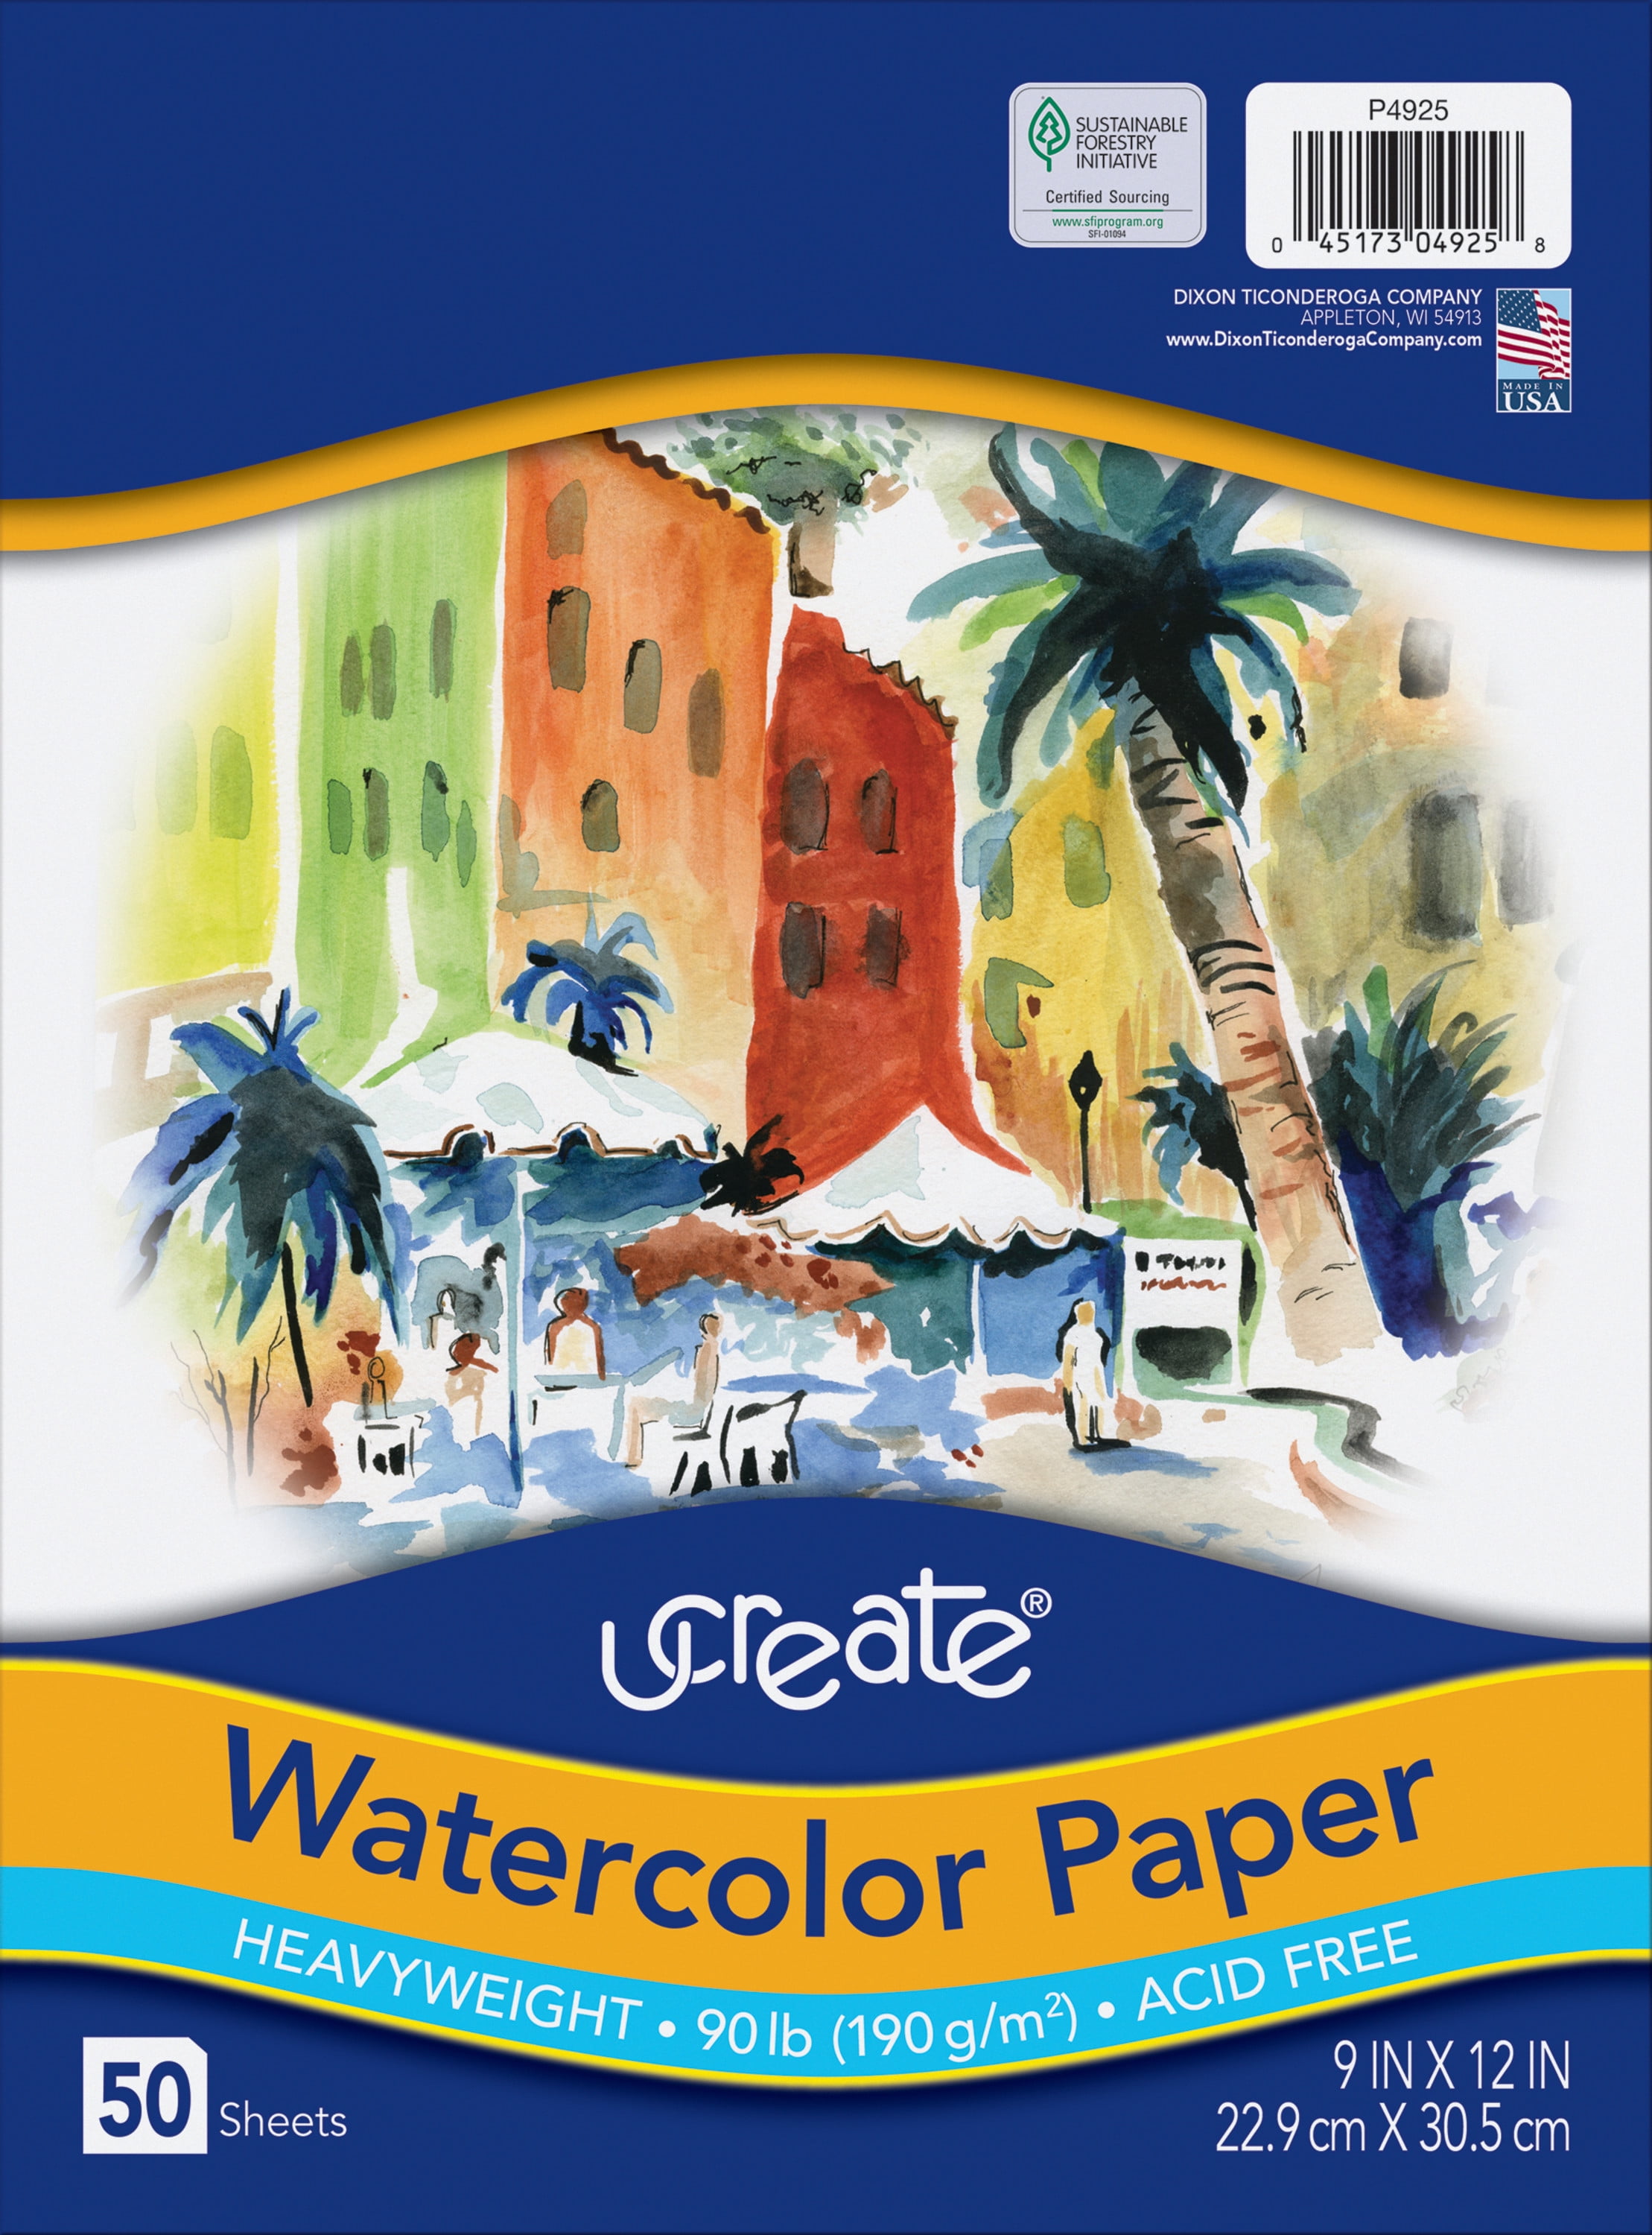 TecUnite 60 Sheets Watercolor Paper White Cold Press Paper Pack for Kid Child Watercolor Drawing Student Artist (5 x 7 inch)